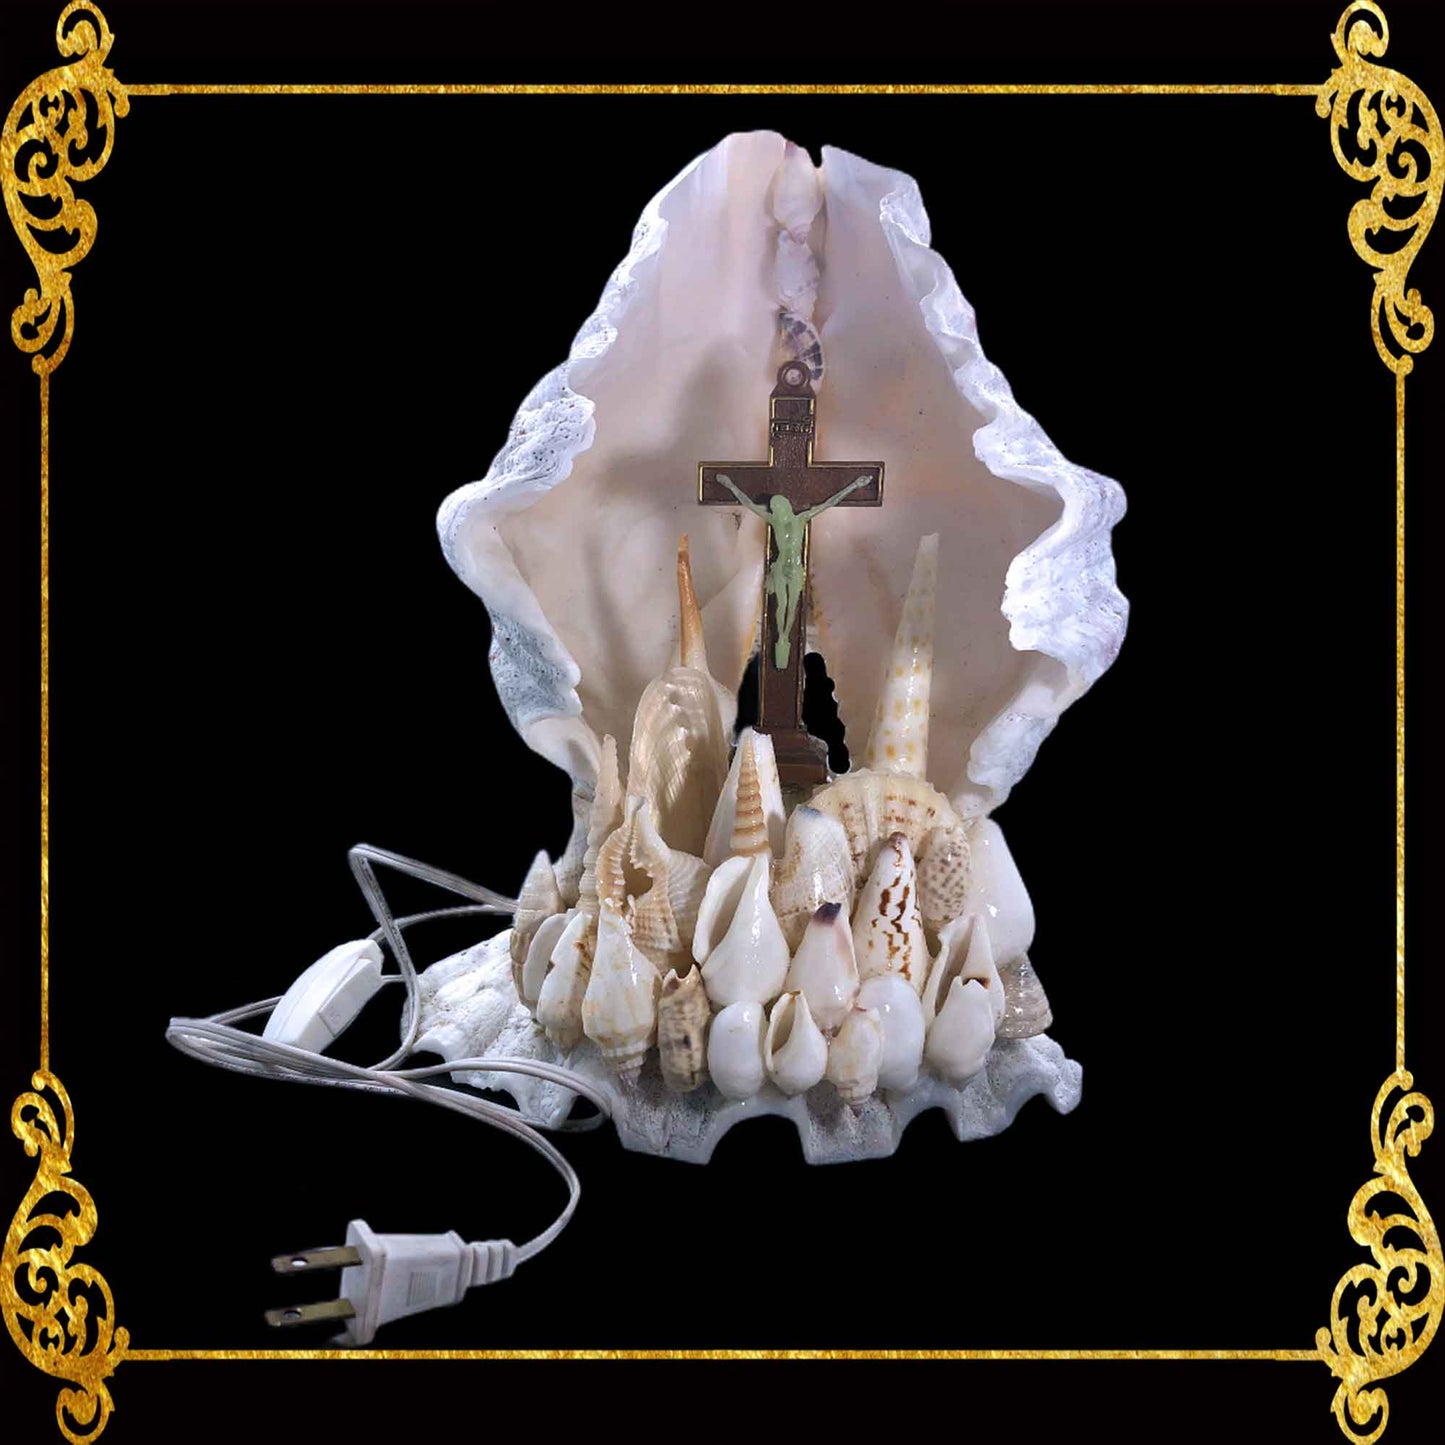 Lamp | Christian Decor | Jesus in Crucifix inside Clams | 10 Inches